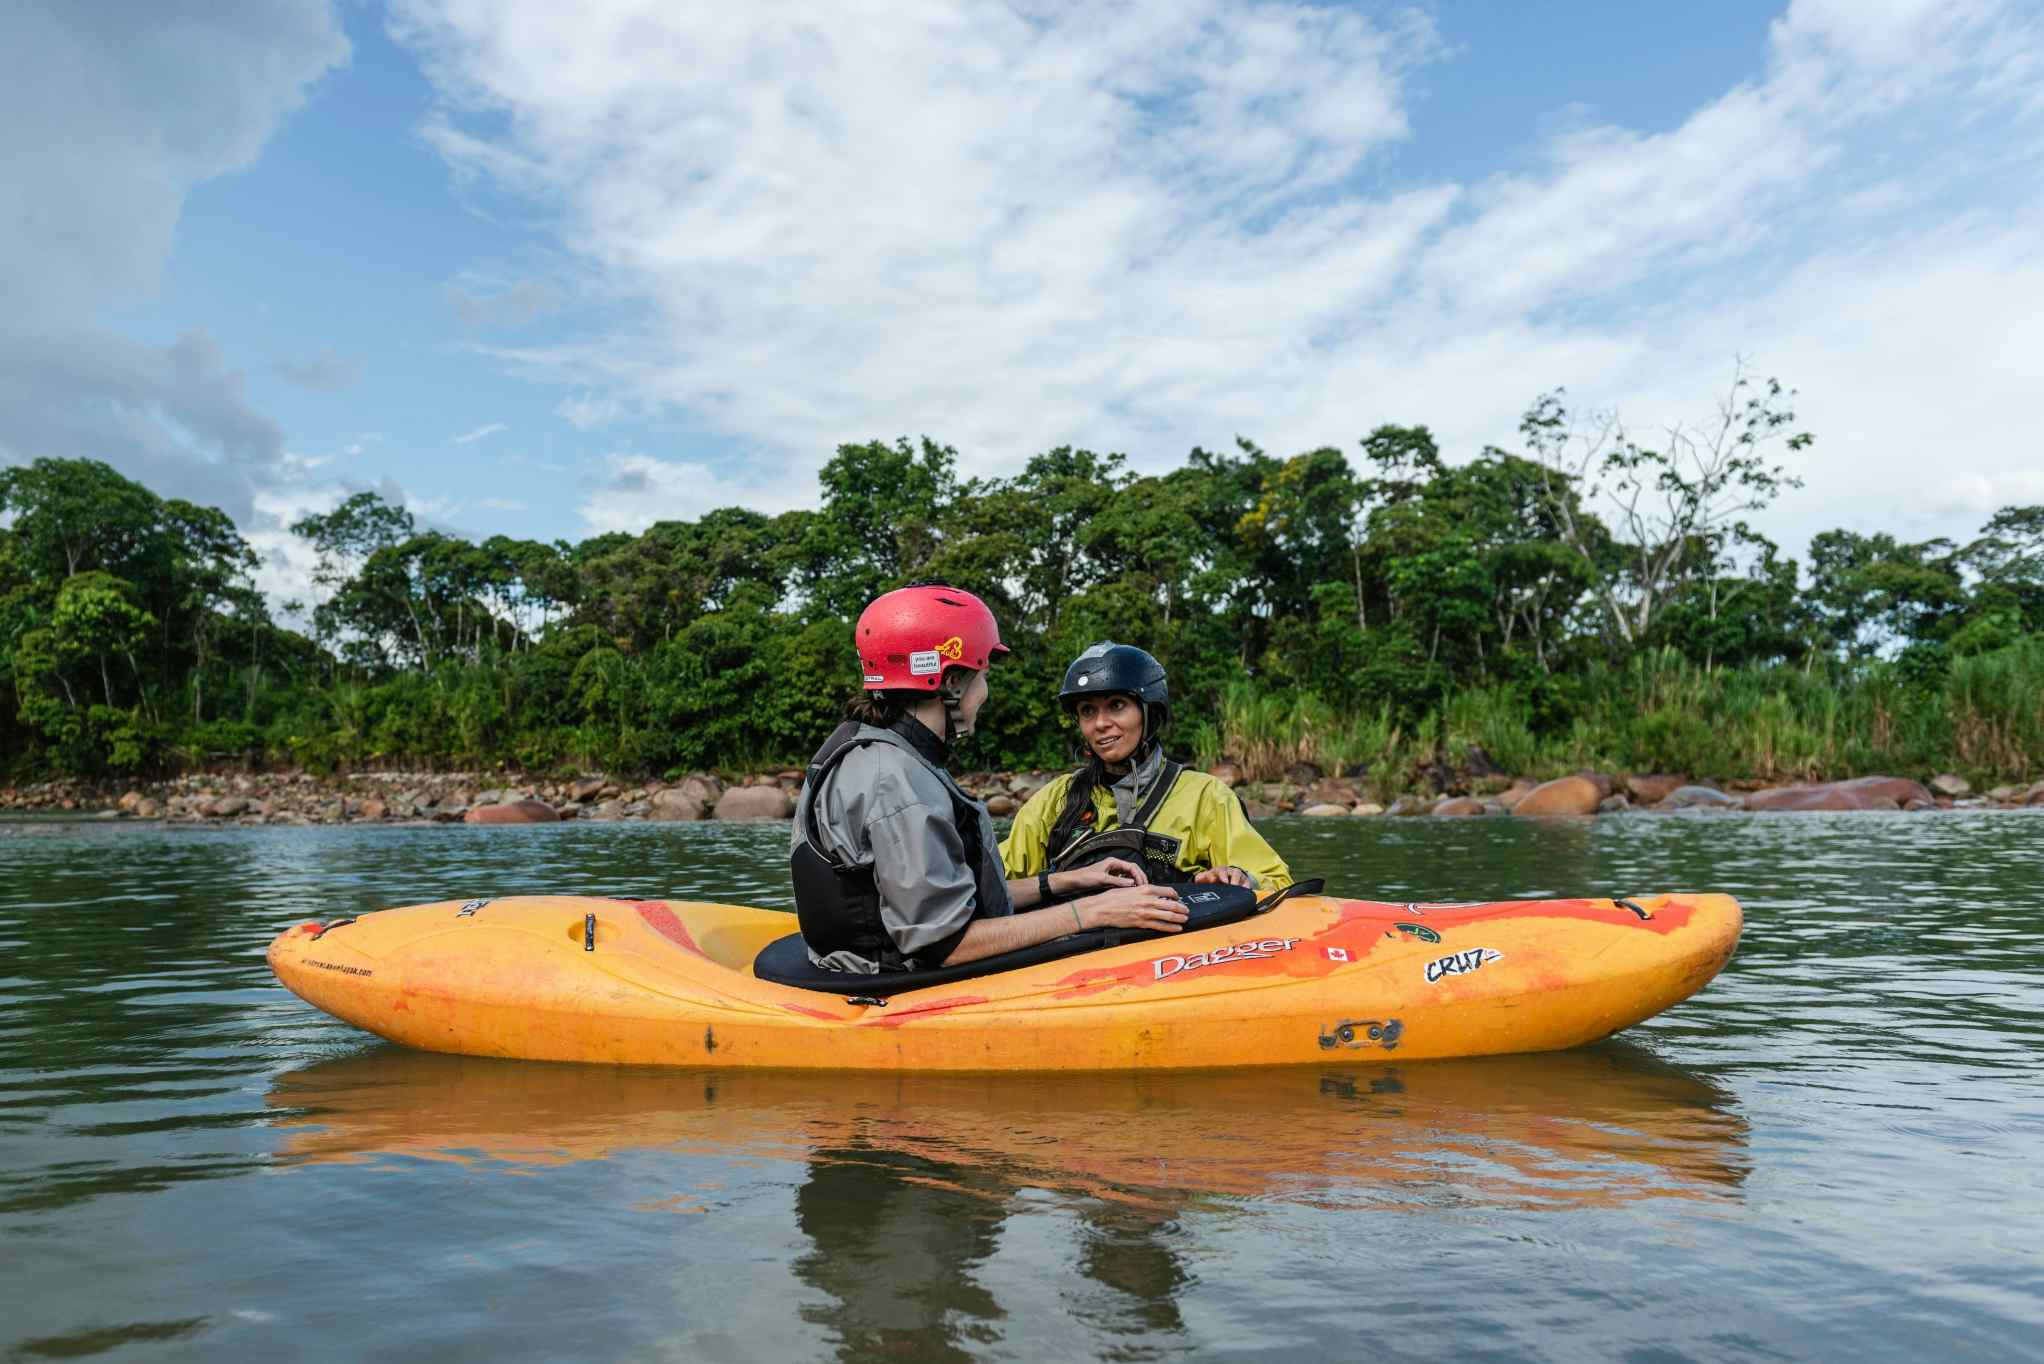 Two kayakers chatting on a river in the Amazon Basin, Ecuador. 